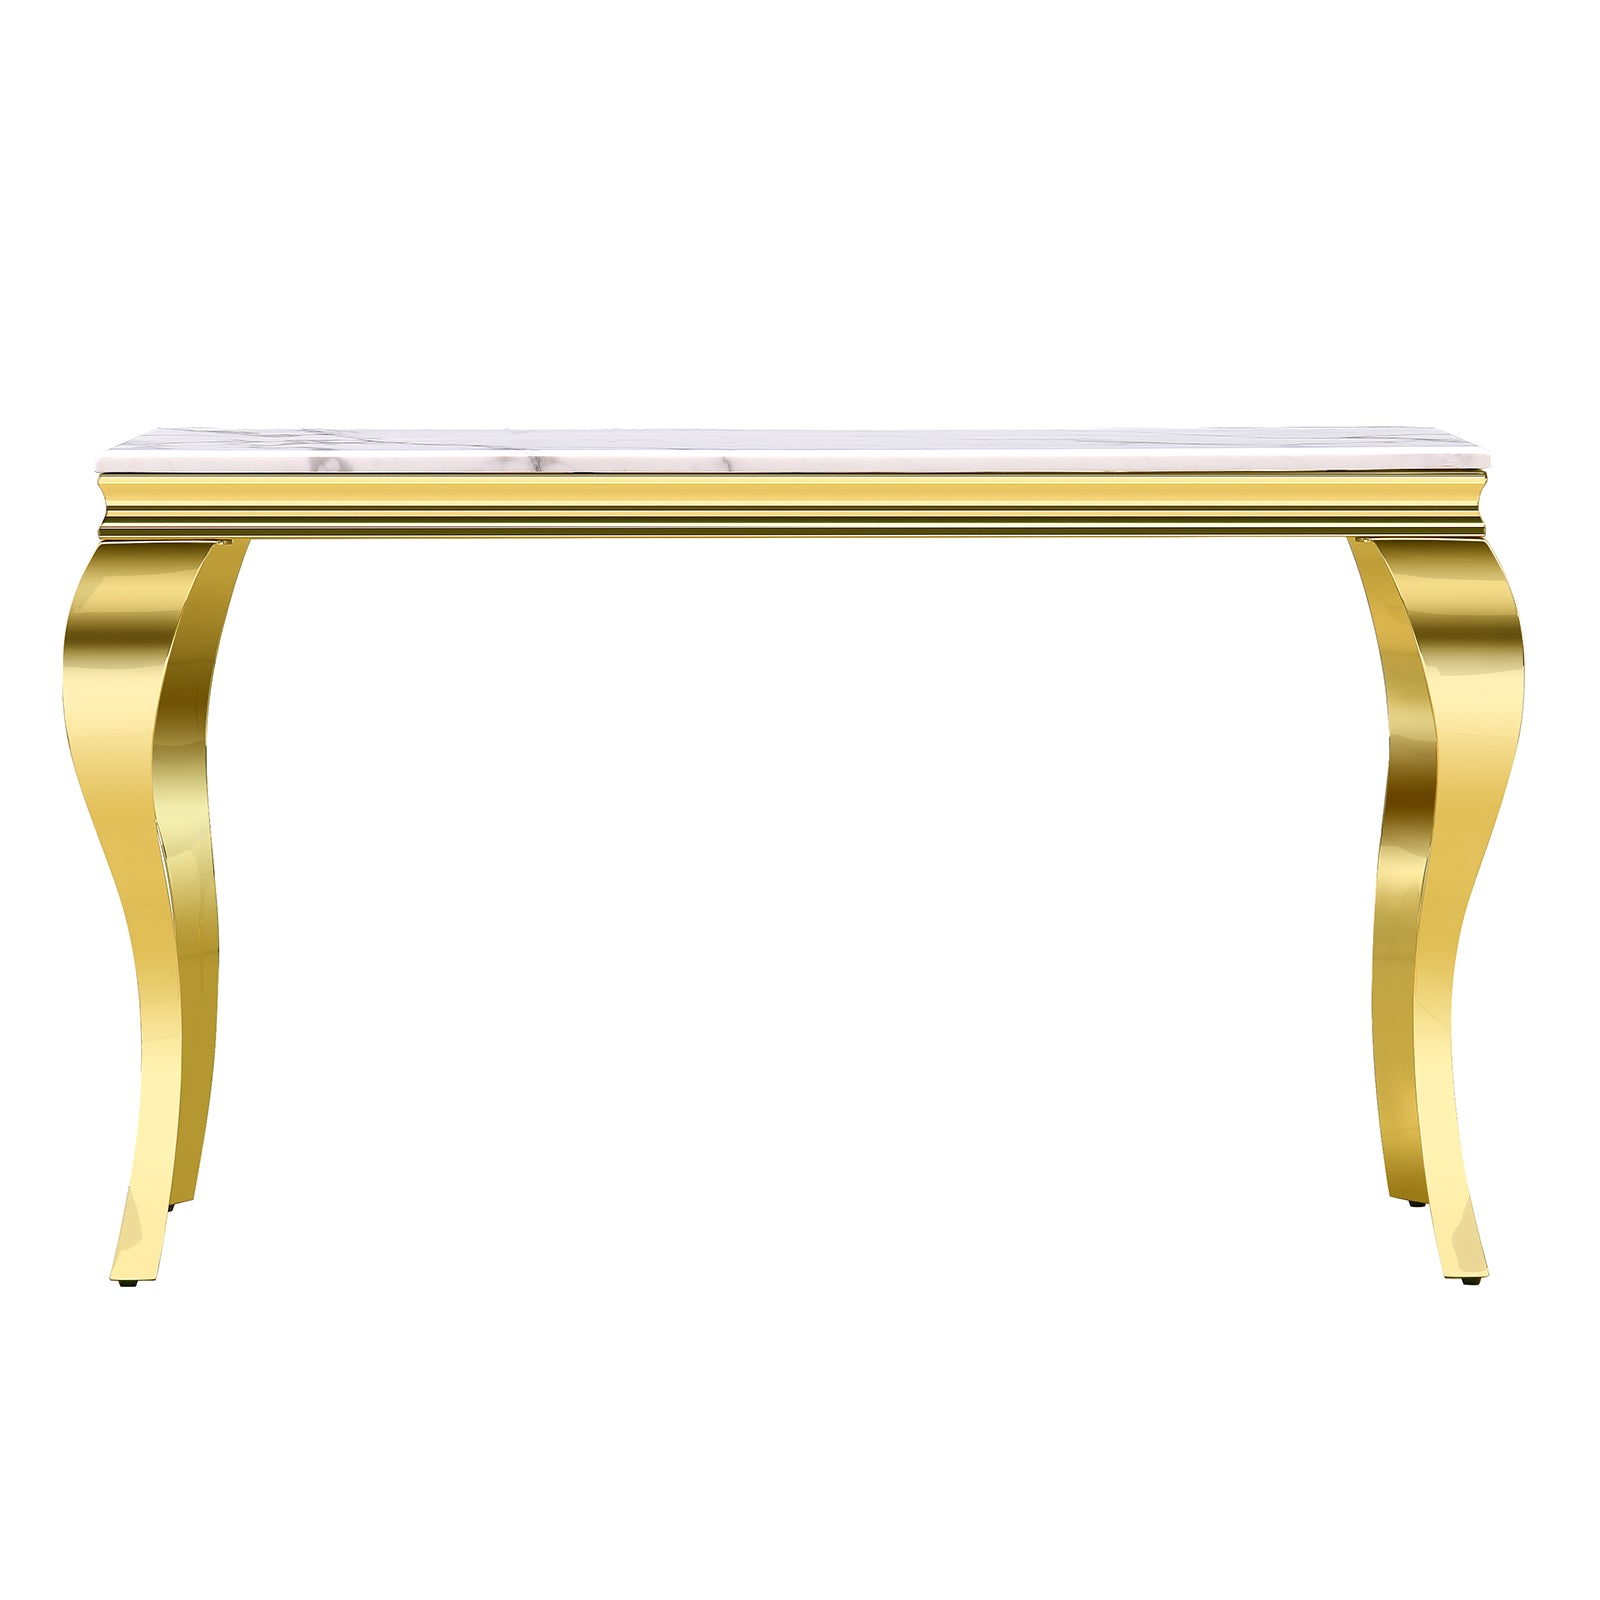 White Gold Sofa Table with White Stainless Steel Legs | S512